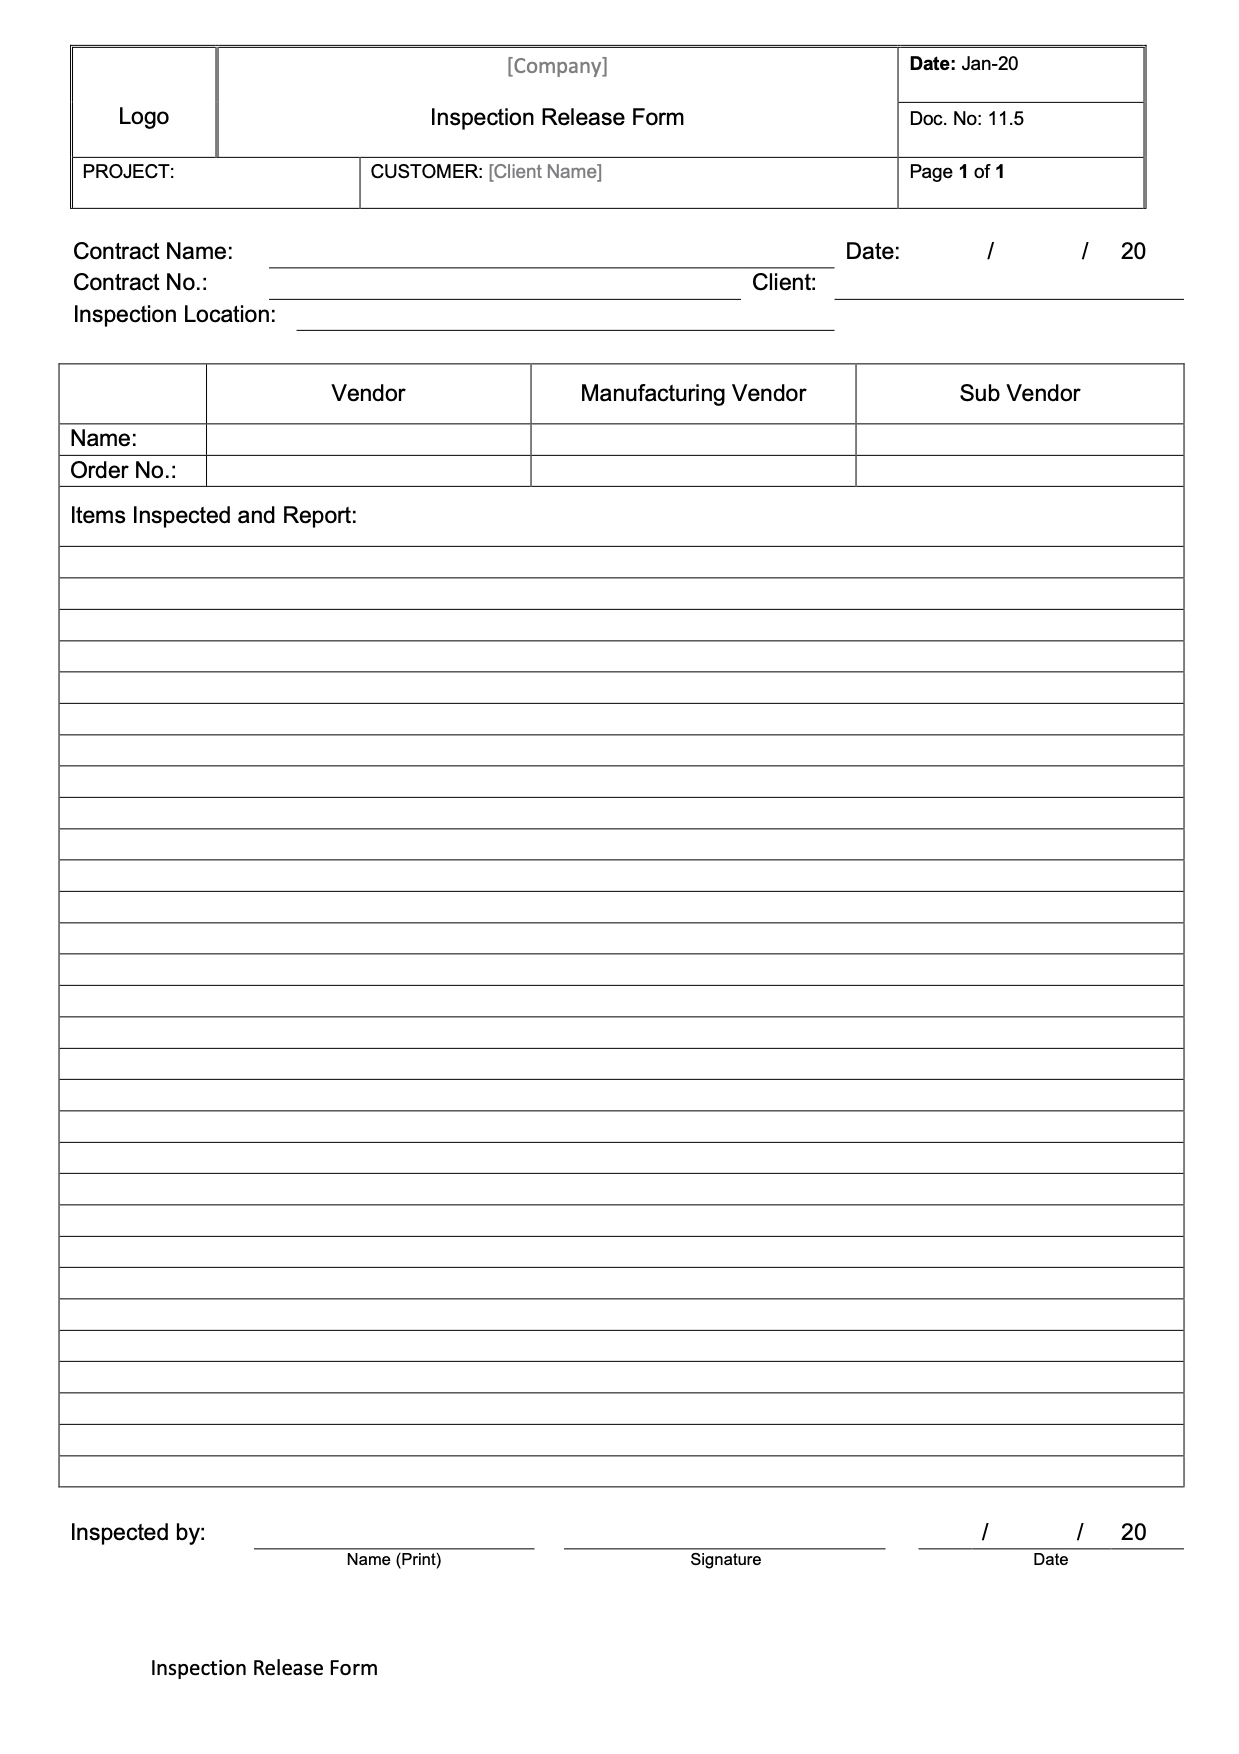 CT006 - Inspection Release Form